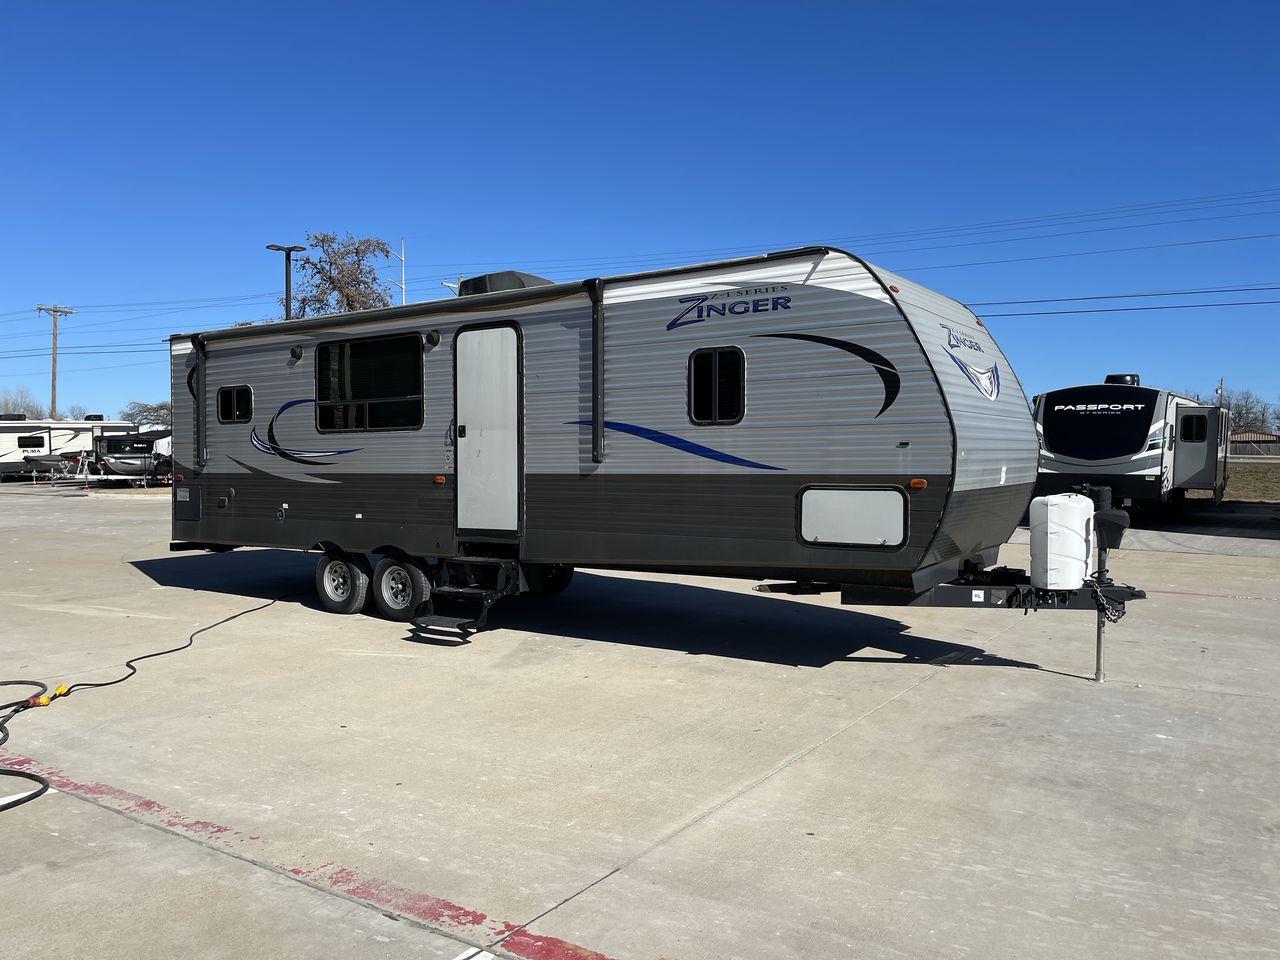 2018 WHITE KEYSTONE ZINGER 280RK (4YDT28021JS) , Length: 32.92 ft. | Dry Weight: 6,570 lbs. | Gross Weight: 9,610 lbs. | Slides: 1 transmission, located at 4319 N Main St, Cleburne, TX, 76033, (817) 678-5133, 32.385960, -97.391212 - Prepare a campout with the family this weekend in this 2018 Keystone Zinger 280RK travel trailer. It features amenities that serve you domestic comfort and convenience on the road! This unit measures 32.92 ft in length, 8 ft in width, 11.17 ft in height, and 6.75 ft in interior height. It has a dry - Photo #21